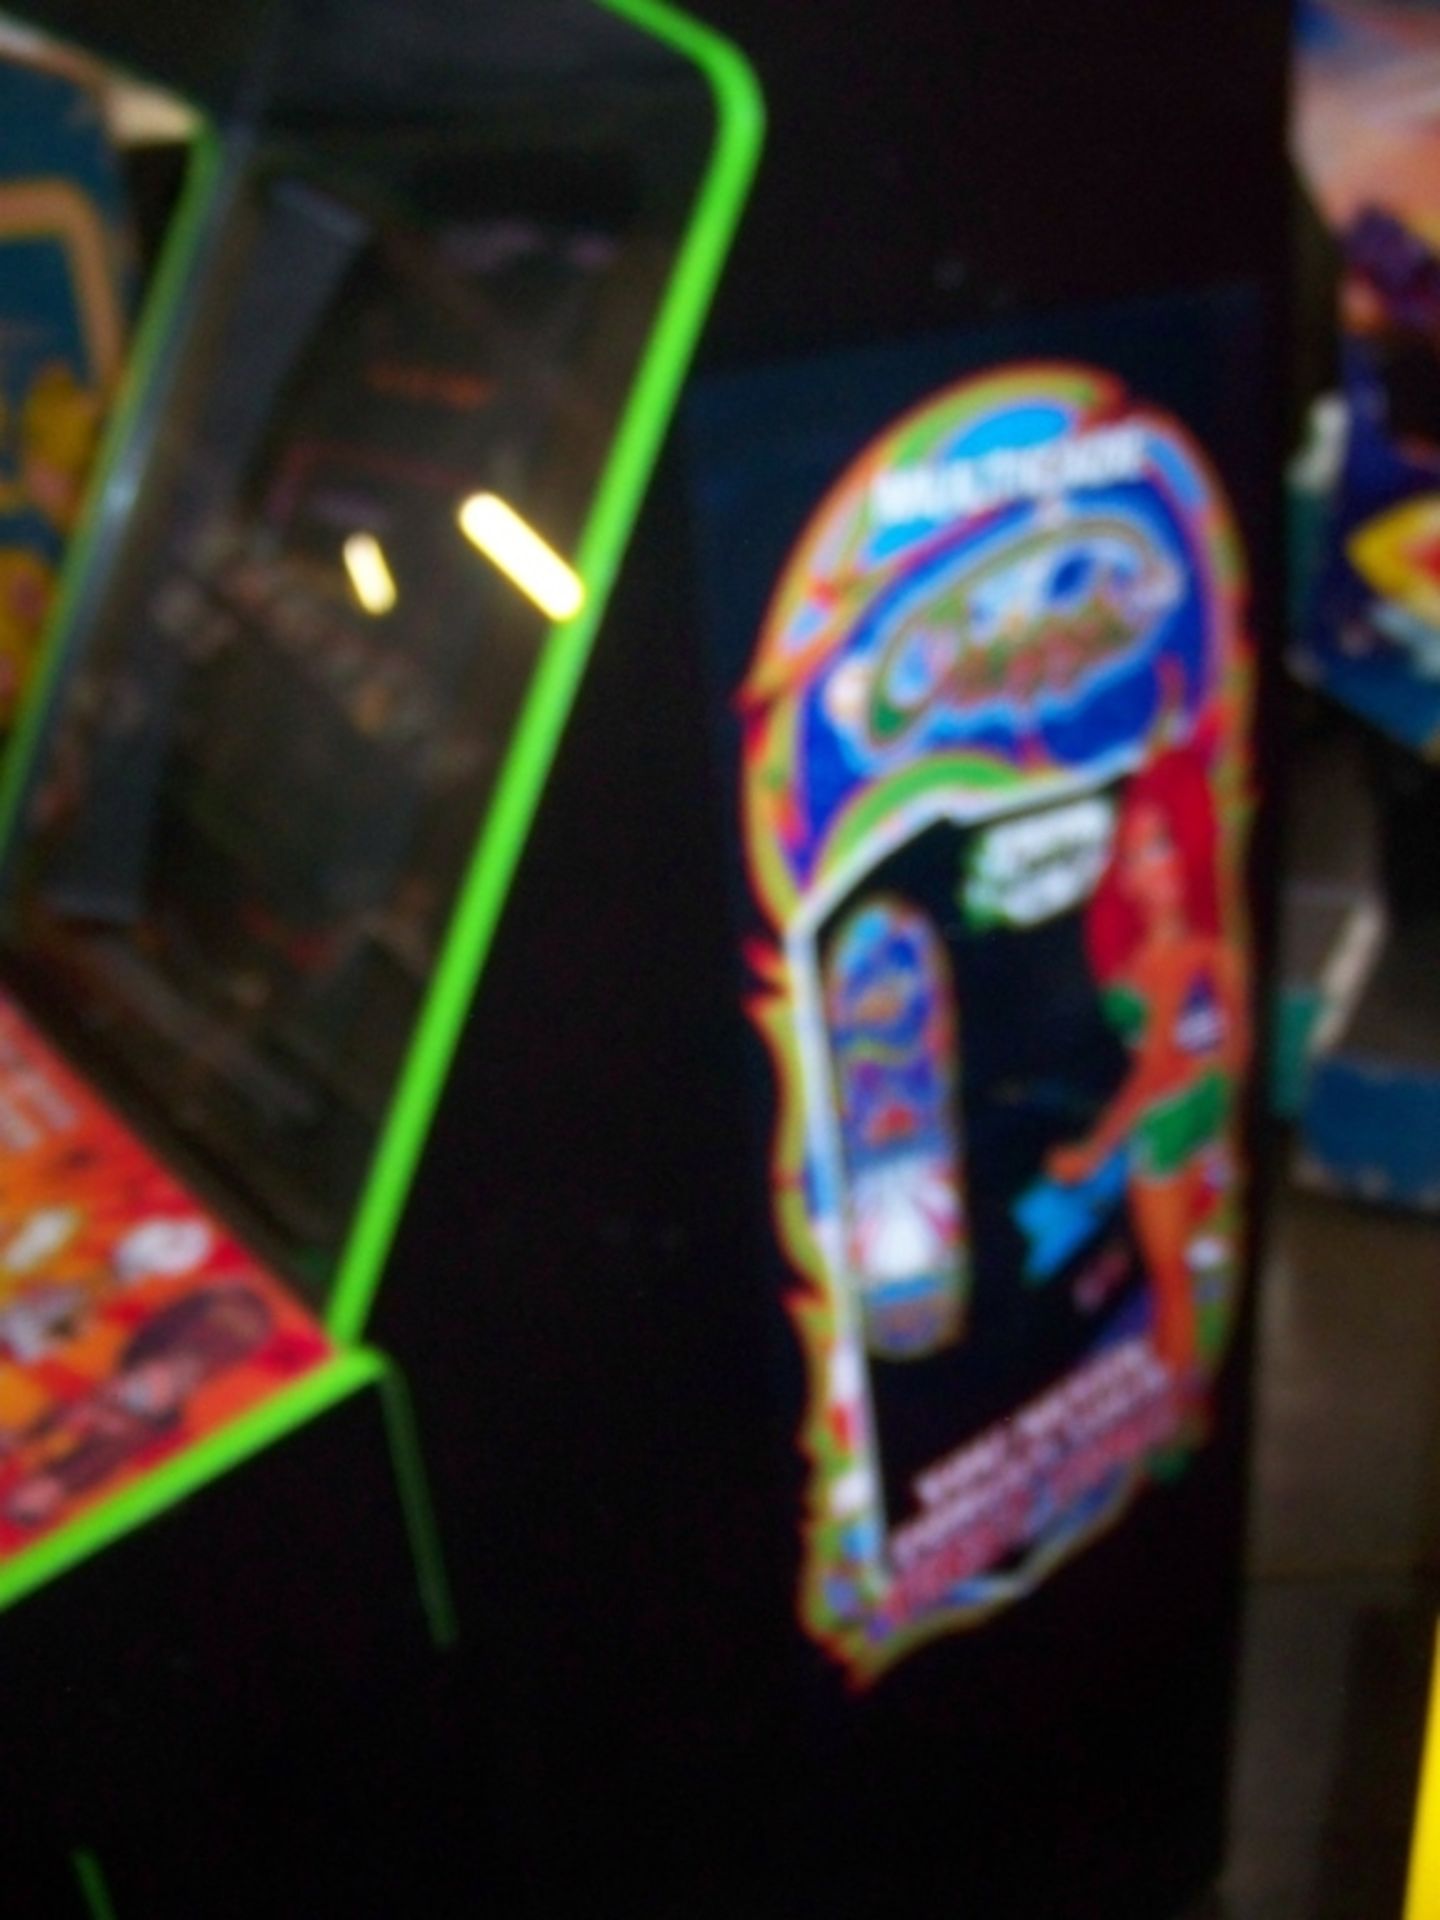 60 IN 1 MULTICADE UPRIGHT ARCADE GAME Item is in used condition. Evidence of wear and commercial - Image 6 of 7